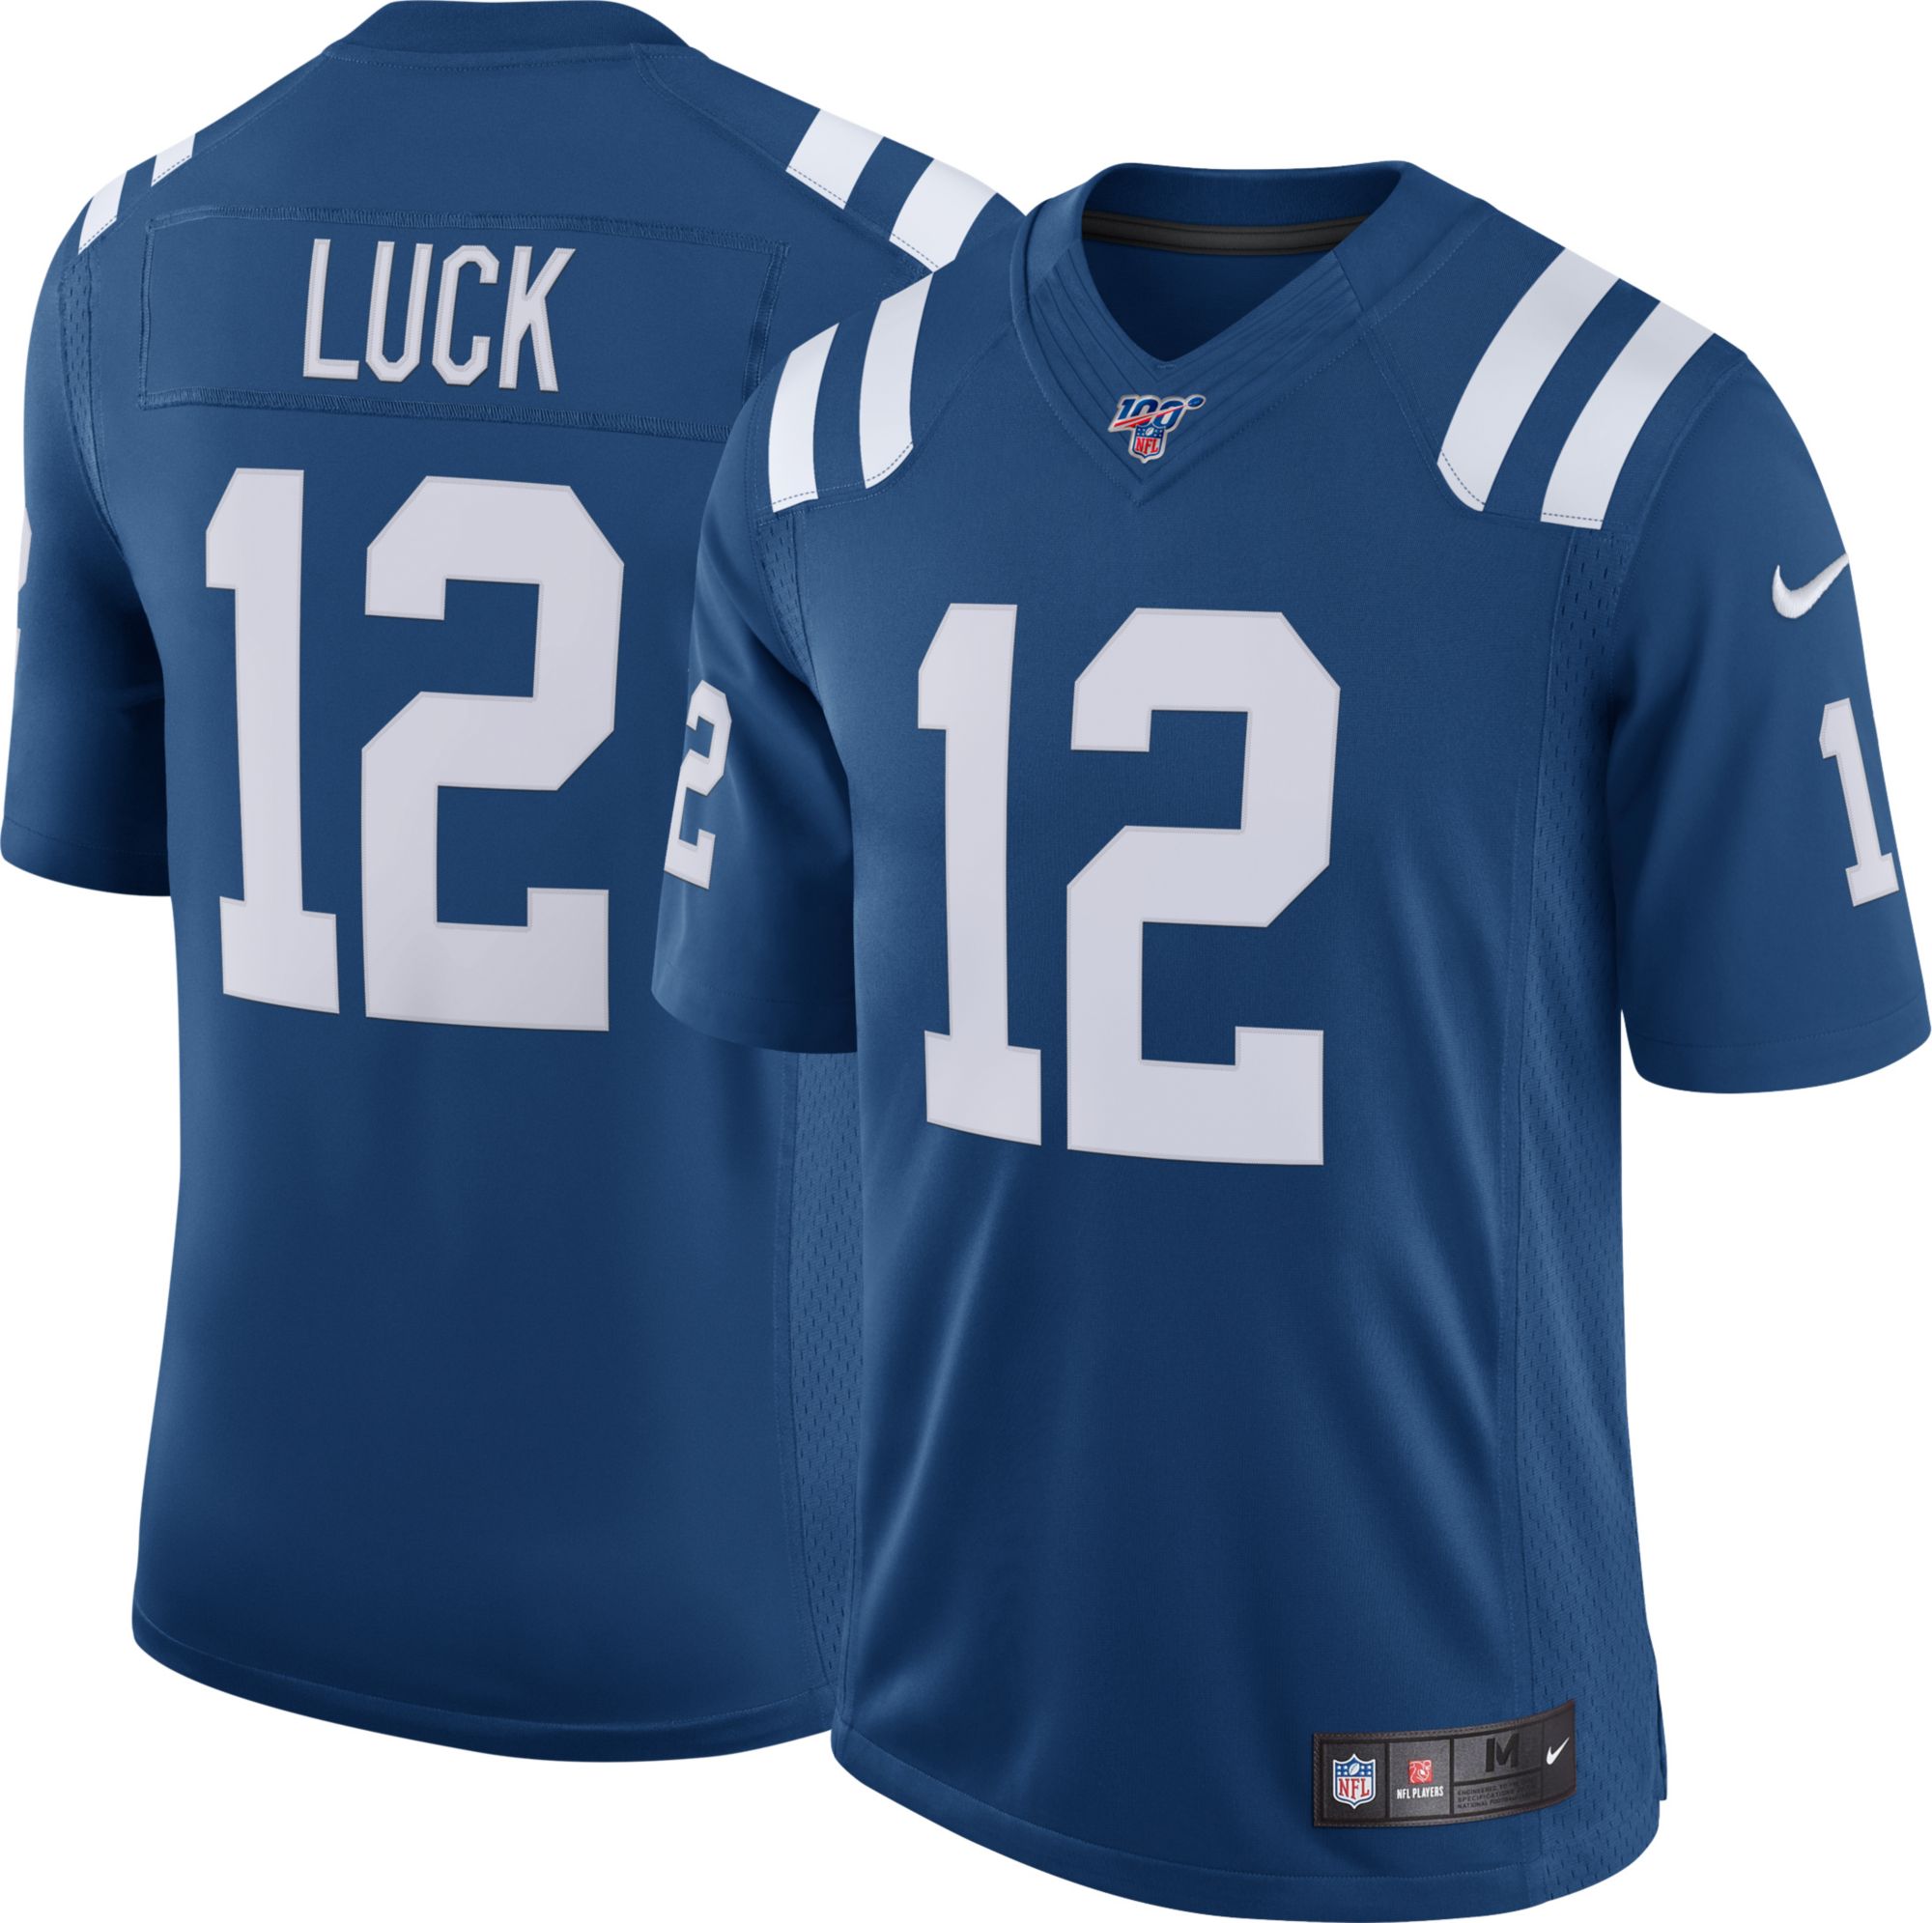 indianapolis colts jersey, OFF 74%,Buy!